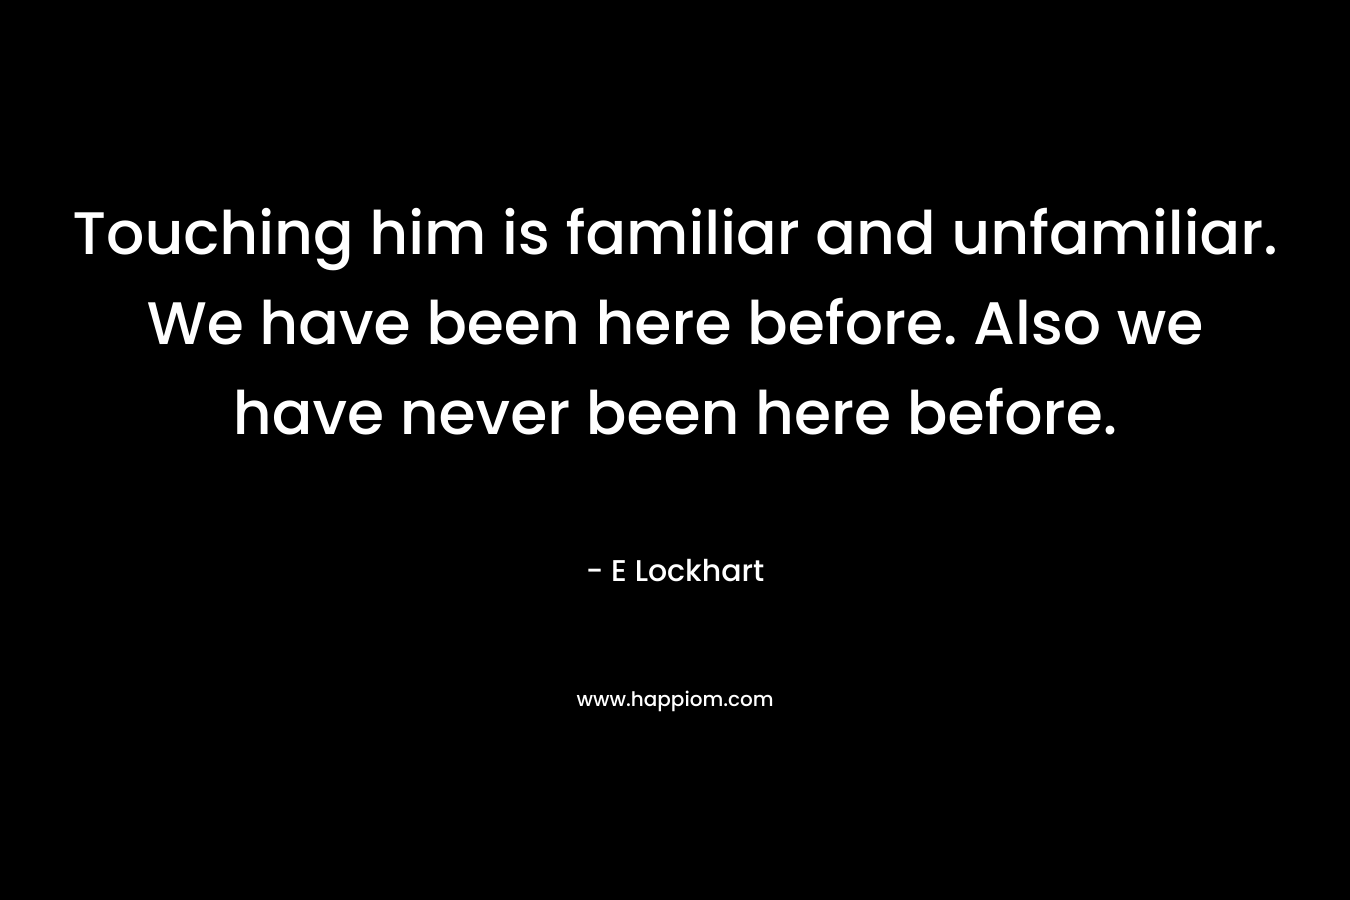 Touching him is familiar and unfamiliar. We have been here before. Also we have never been here before. – E Lockhart